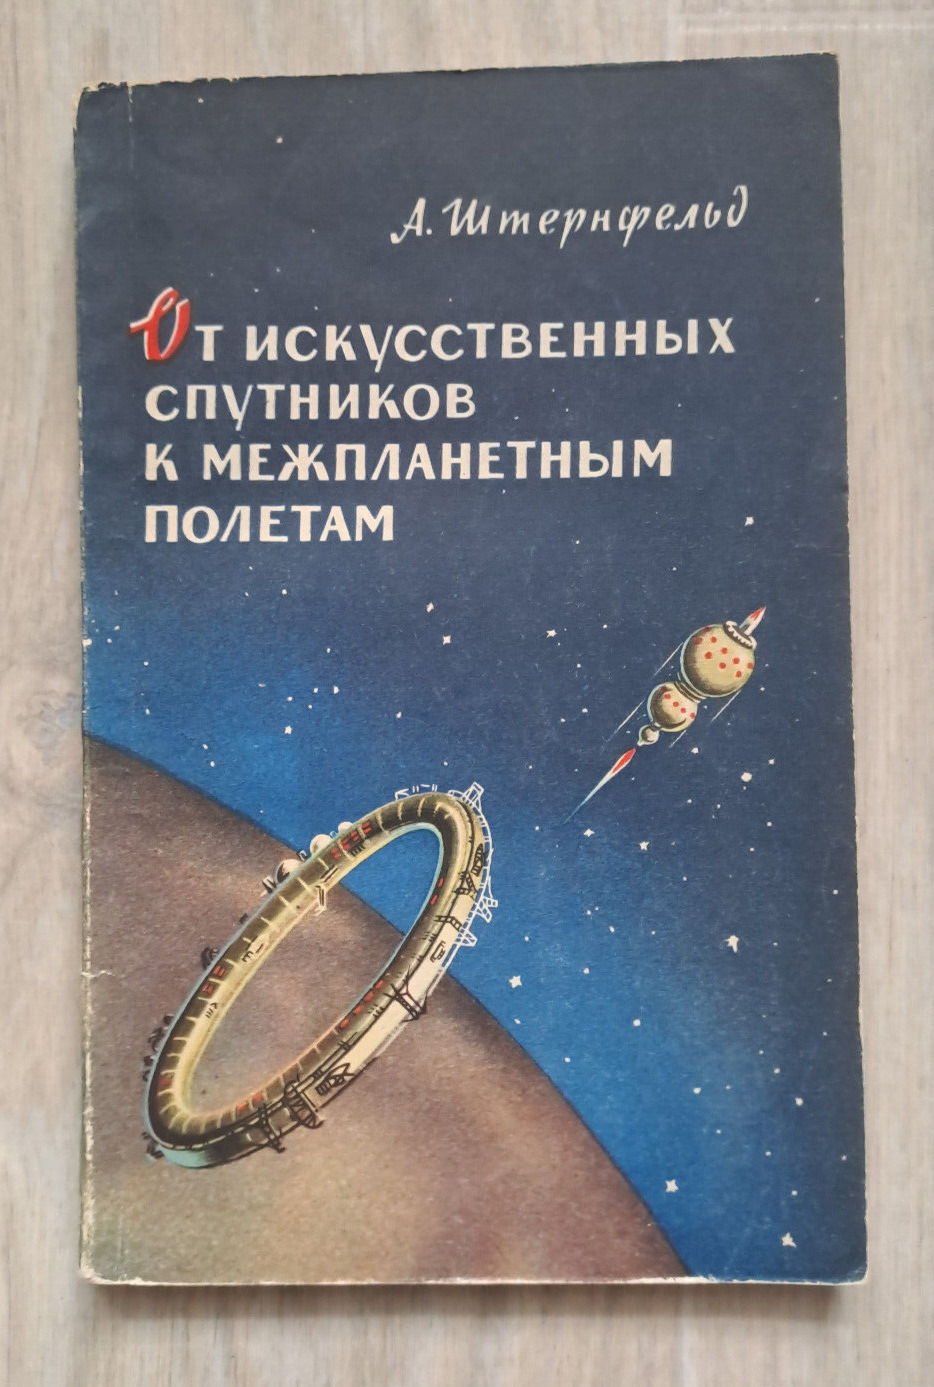 1957 A. Sternfeld From satellites to interplanetary flights Space Russian book